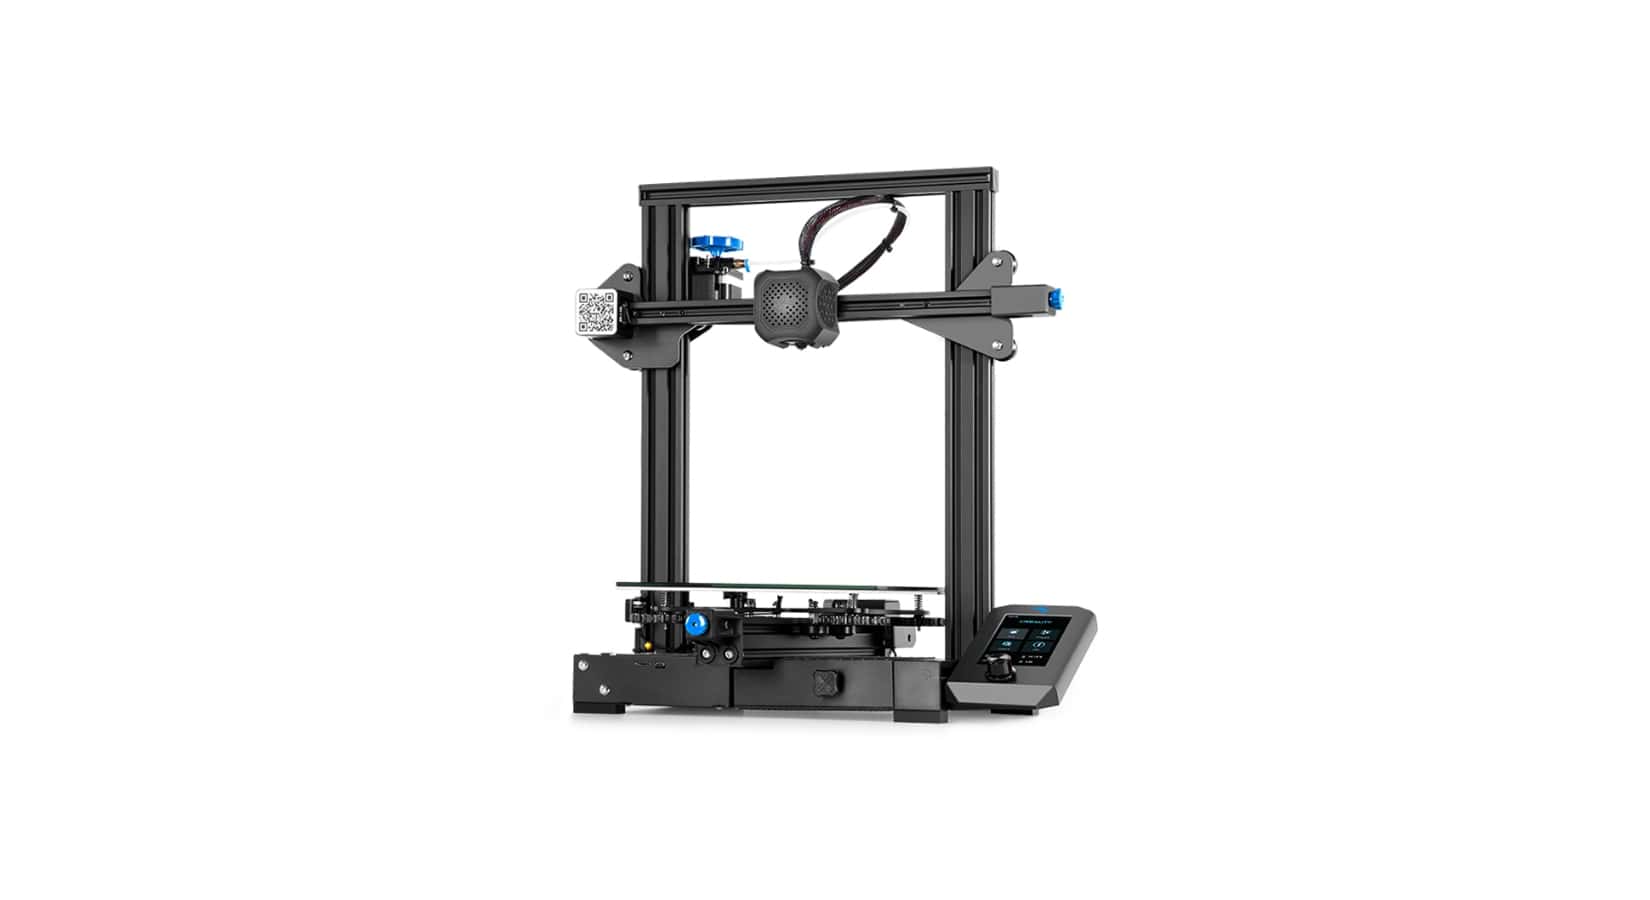 Creality Ender 3 V2: Review the Specs